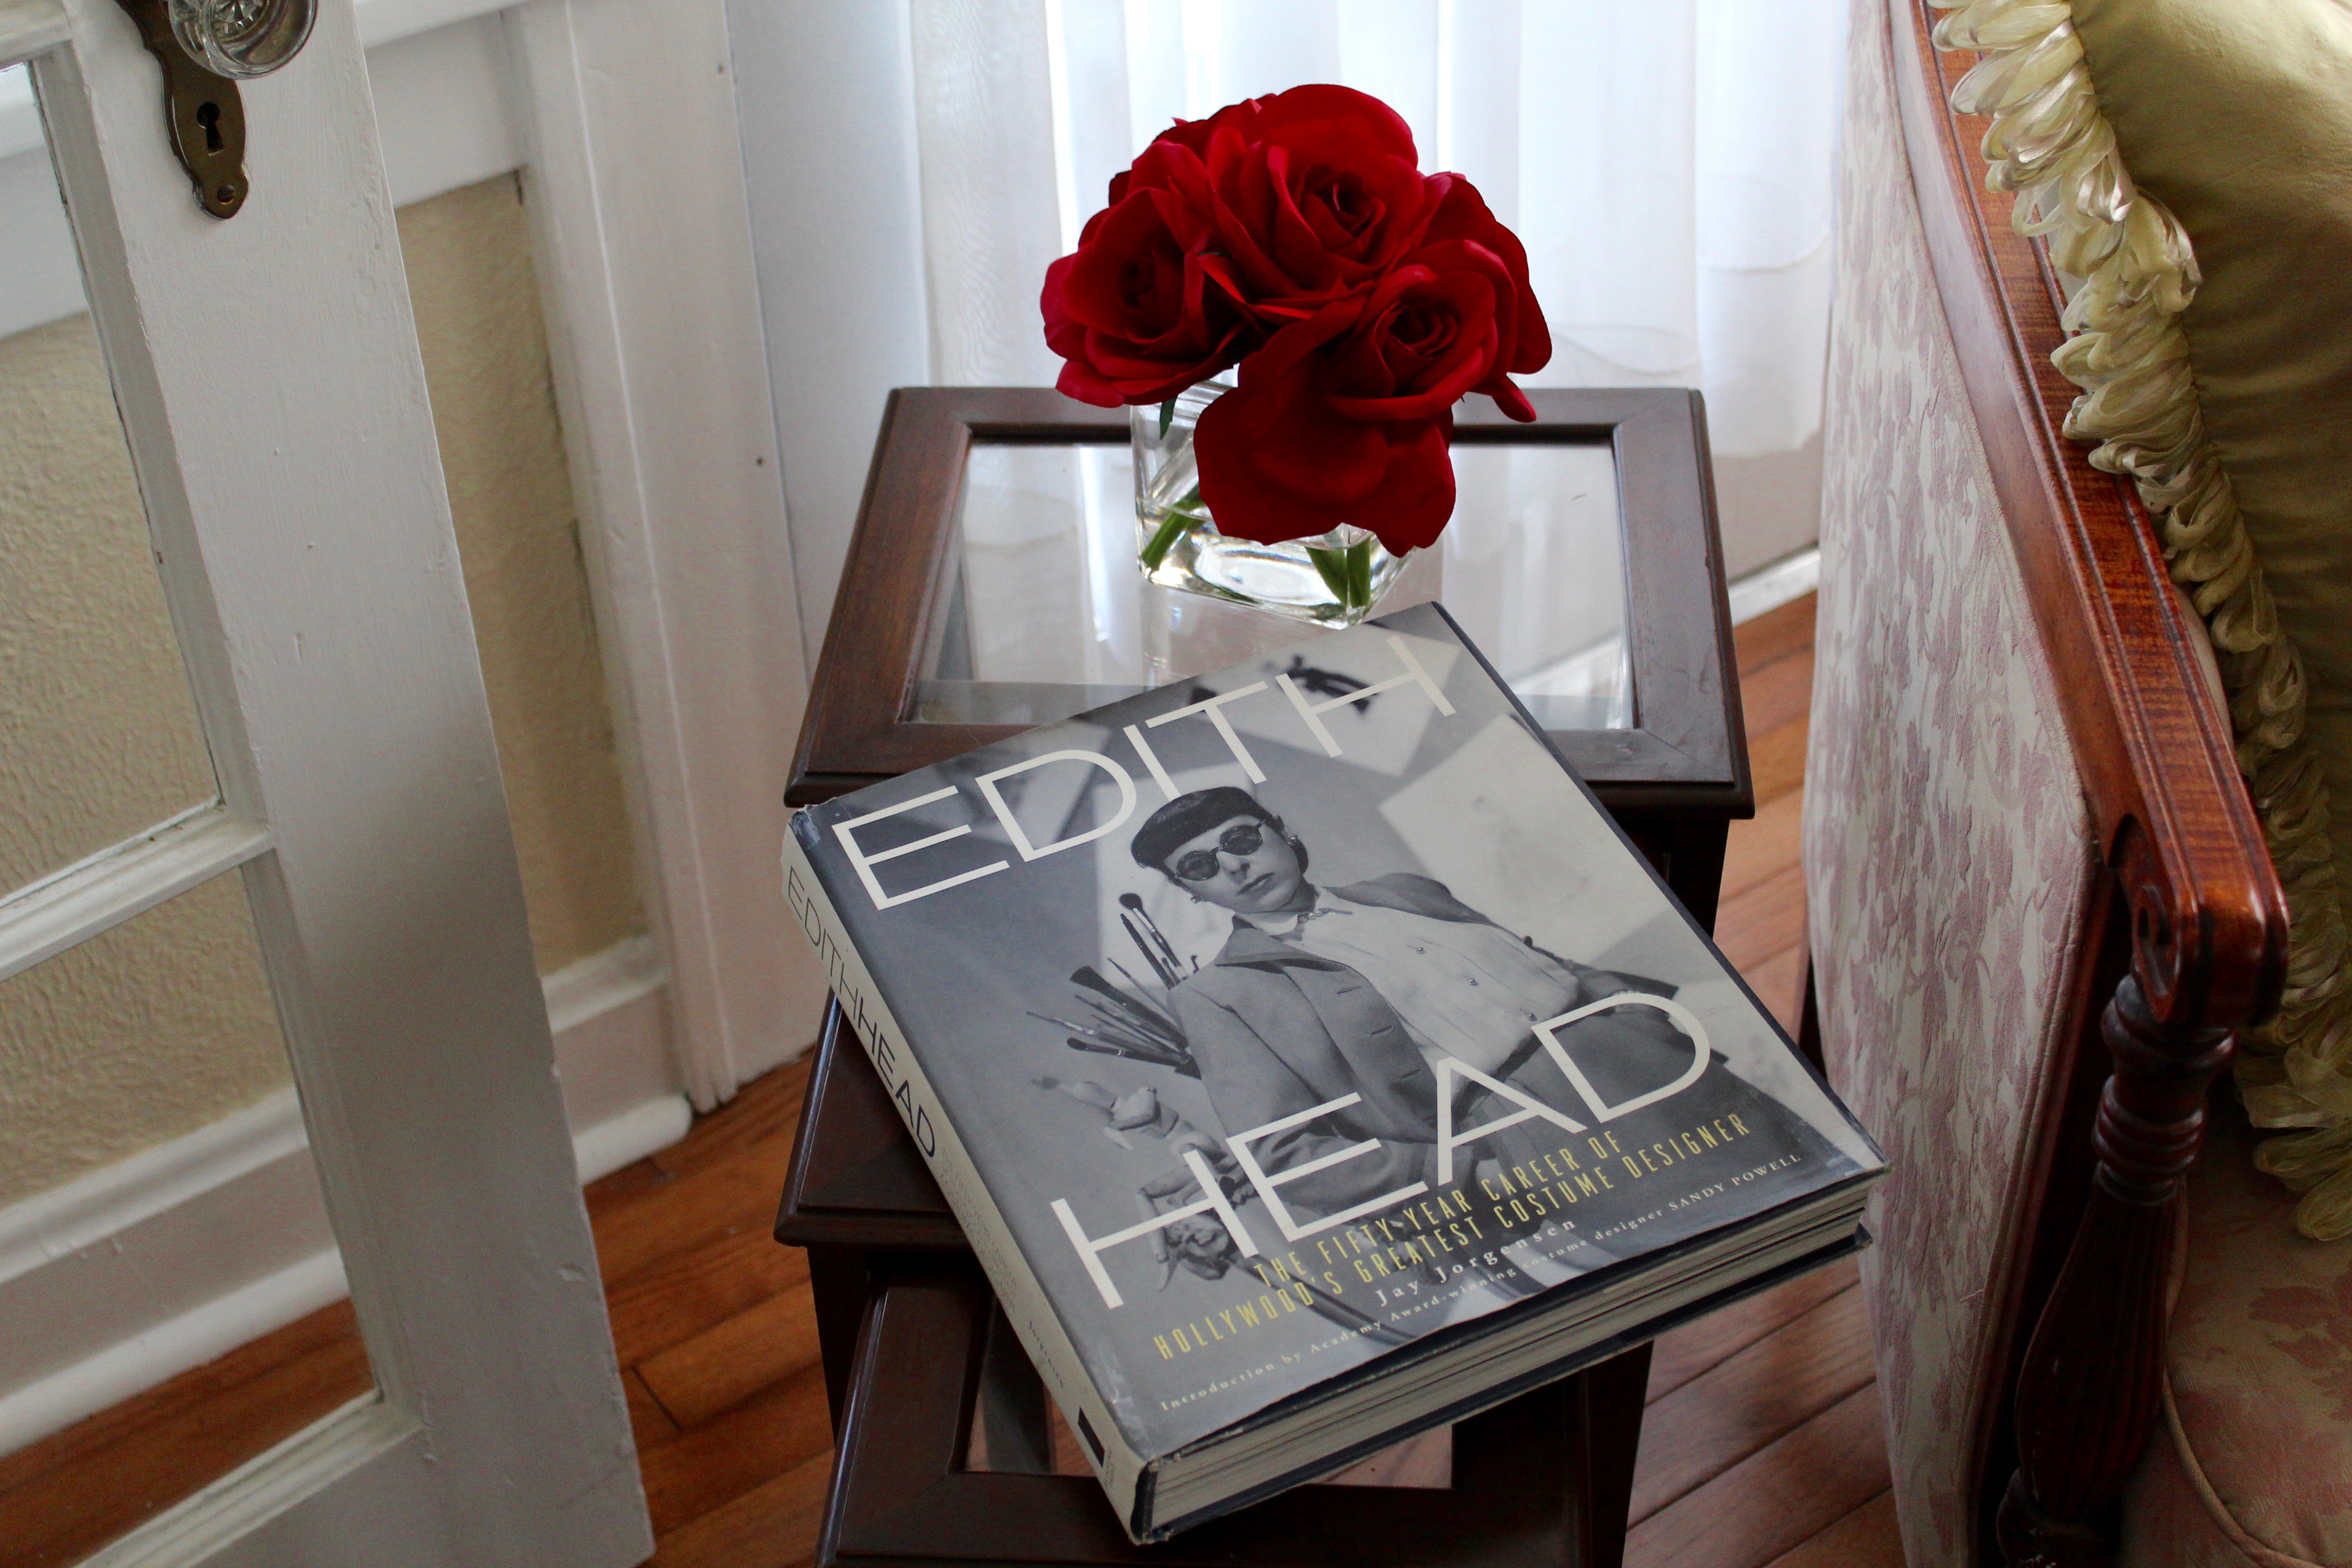 My copy of Edith Head: The Fifty-Year Career of Hollywood's Greatest Costume Designer.